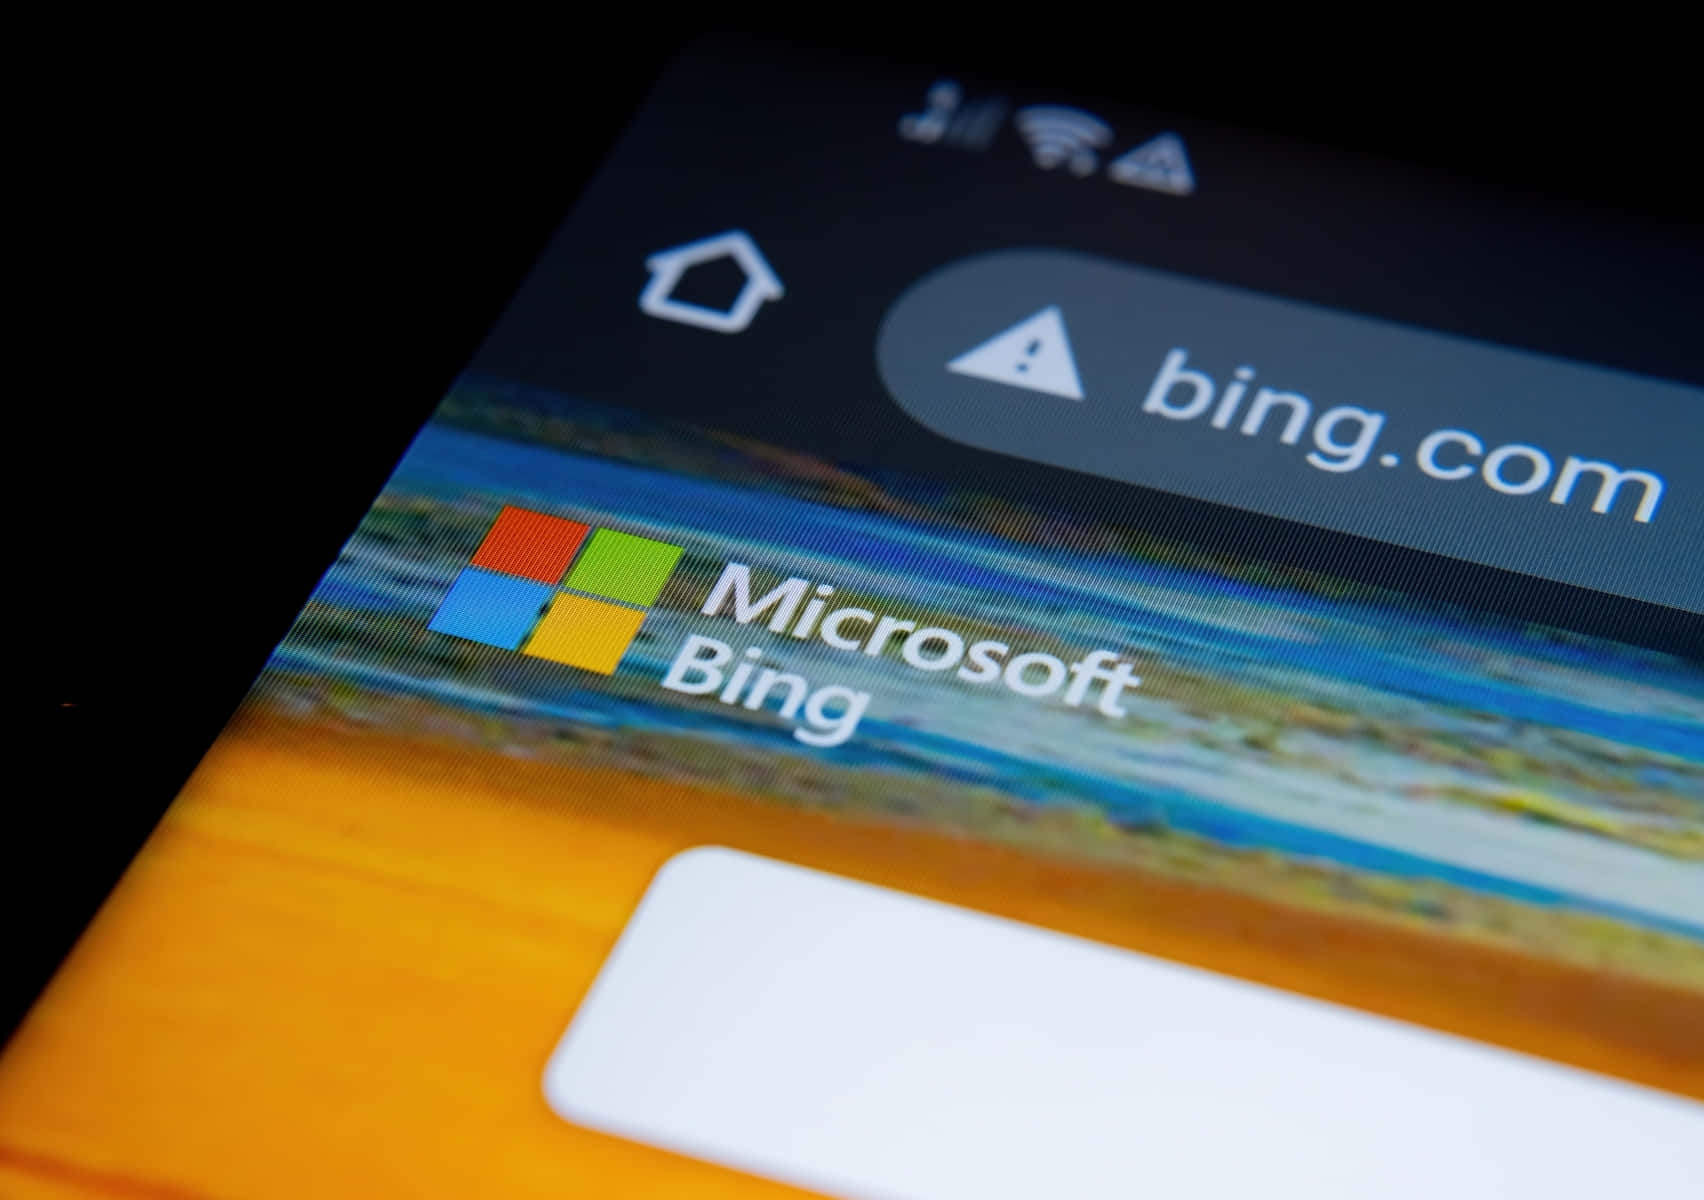 Find the World's Greatest Destinations with Bing